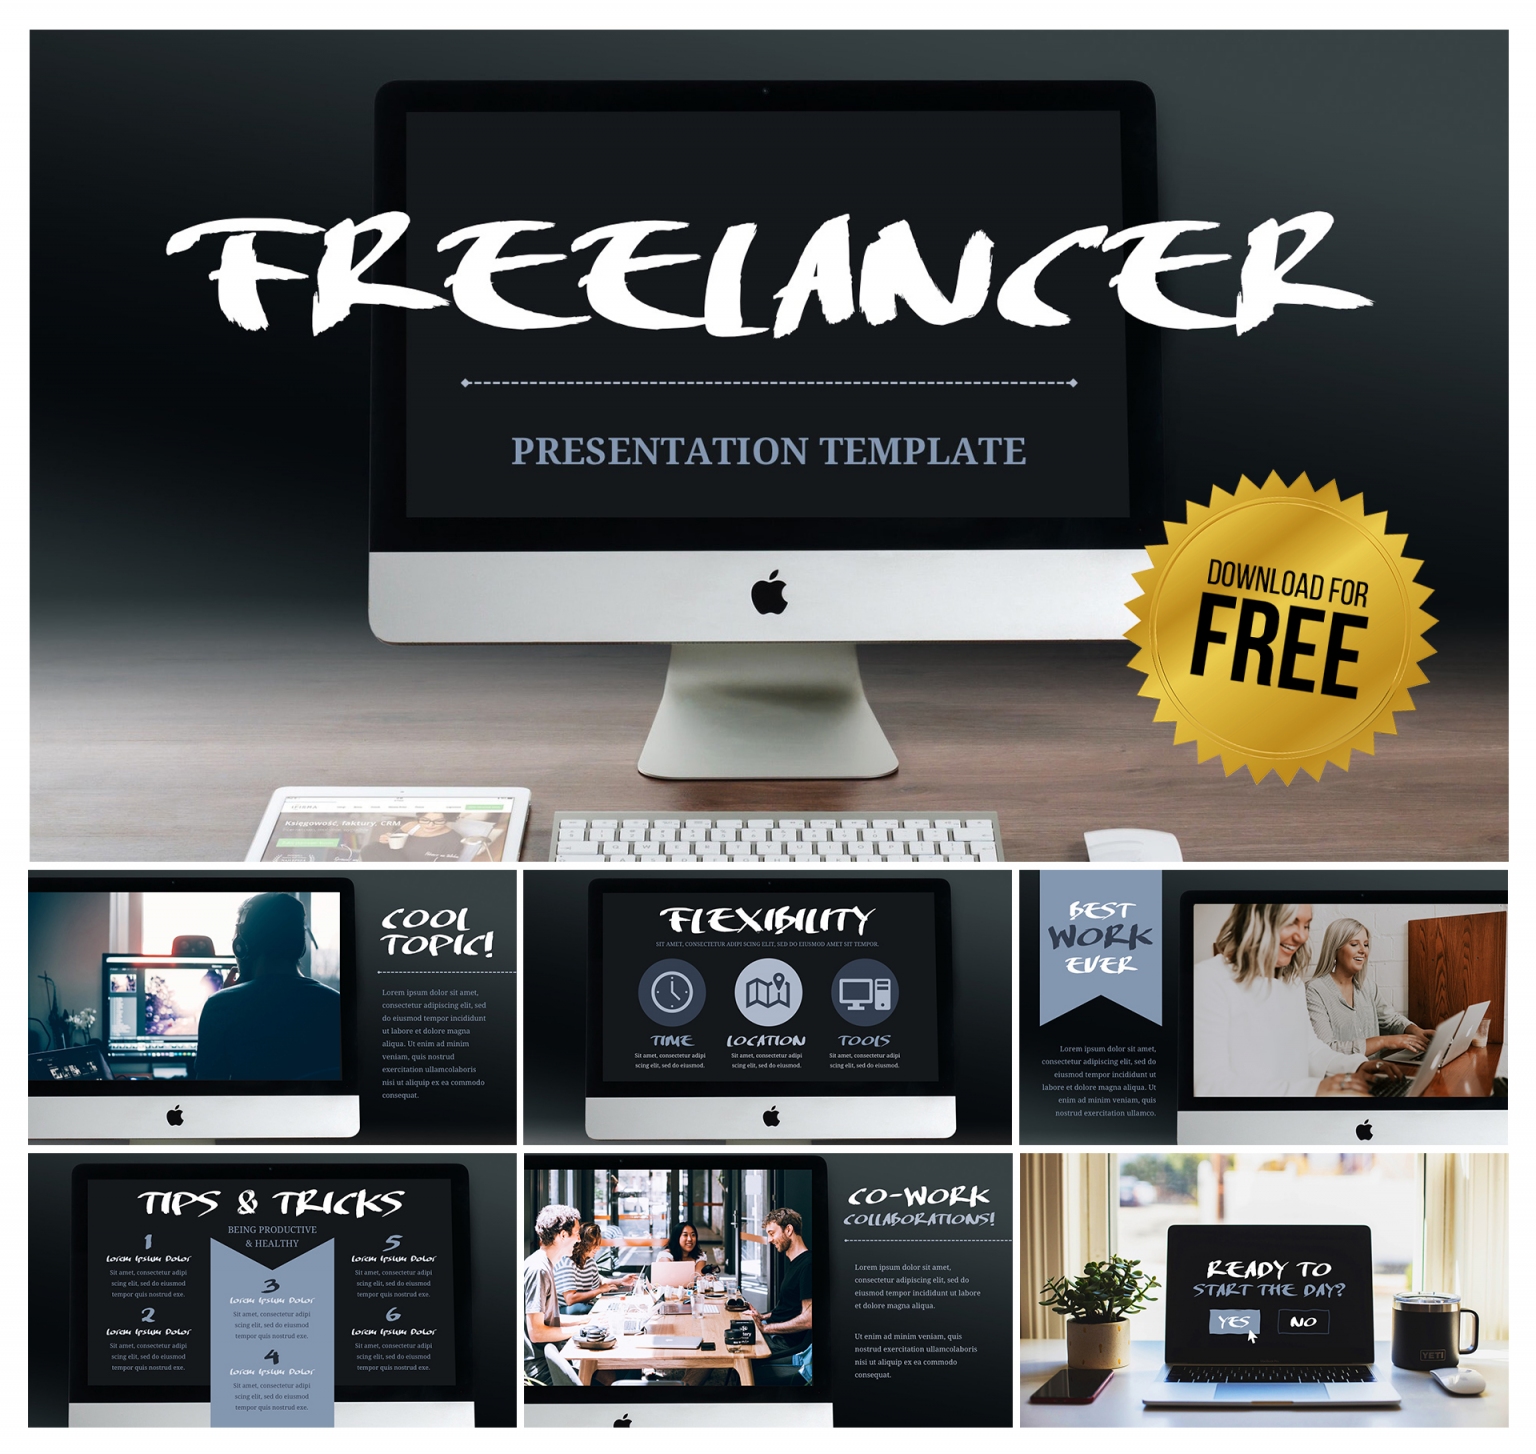 Freelancer PowerPoint Template for Sharing Tips and Advice